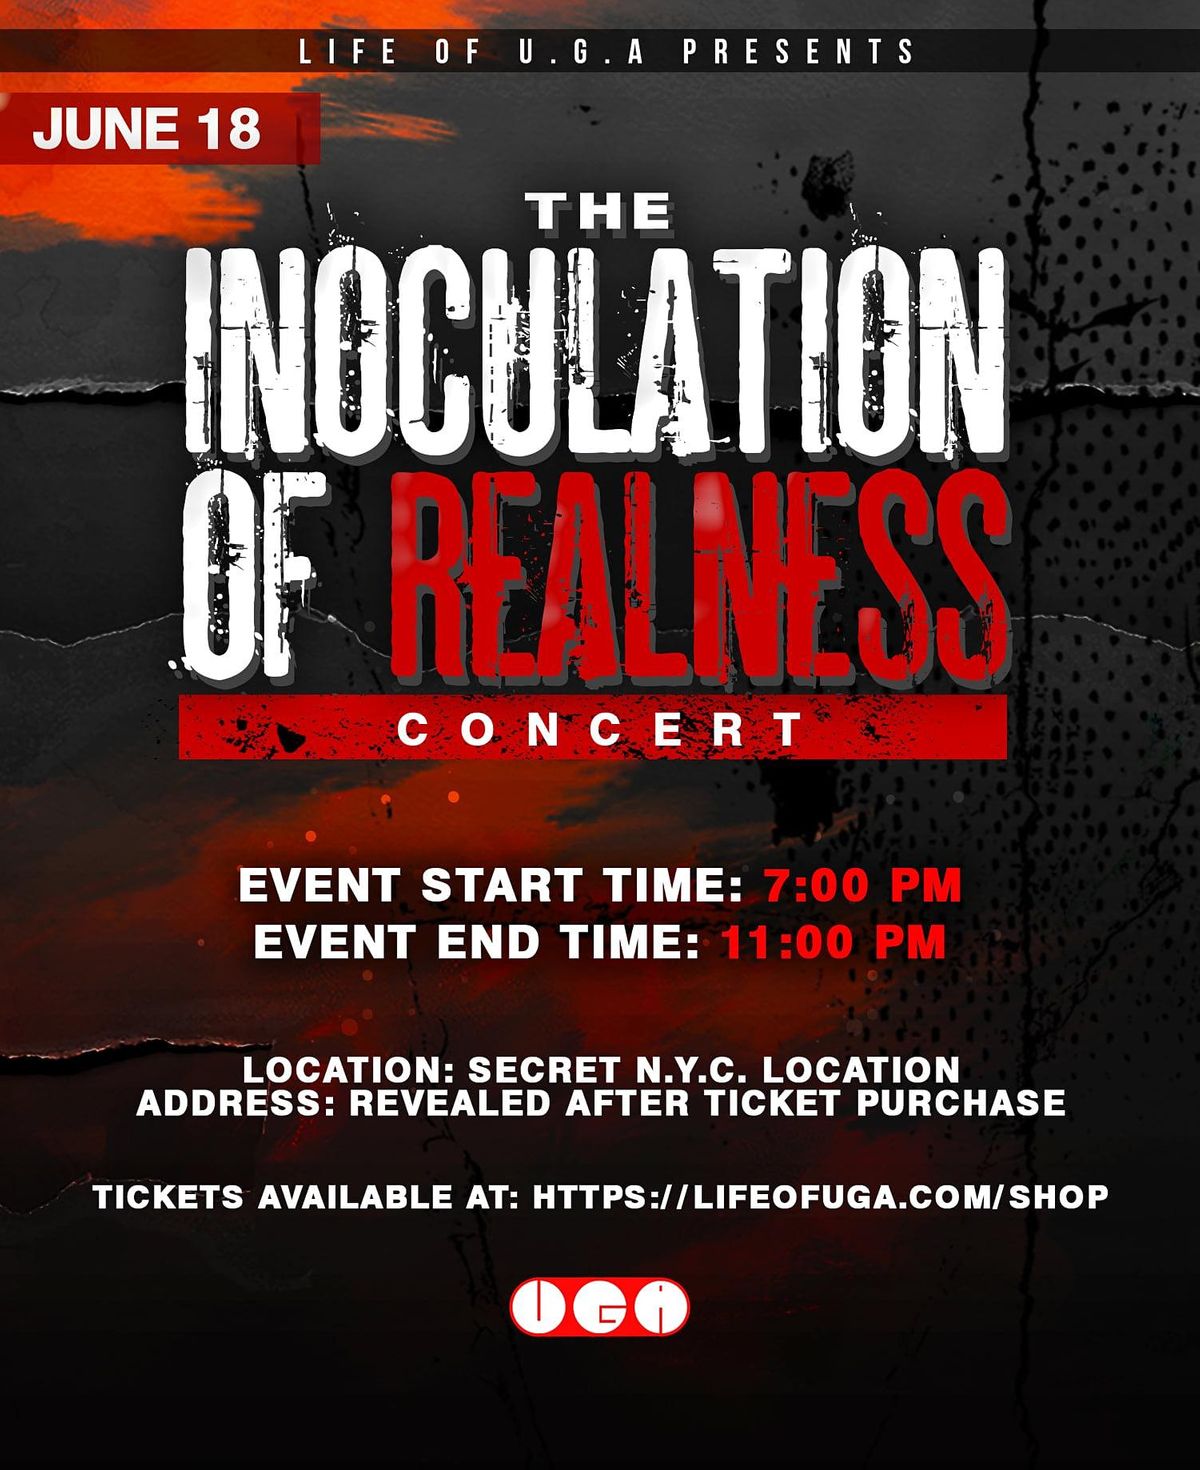 The Inoculation of Realness Concert